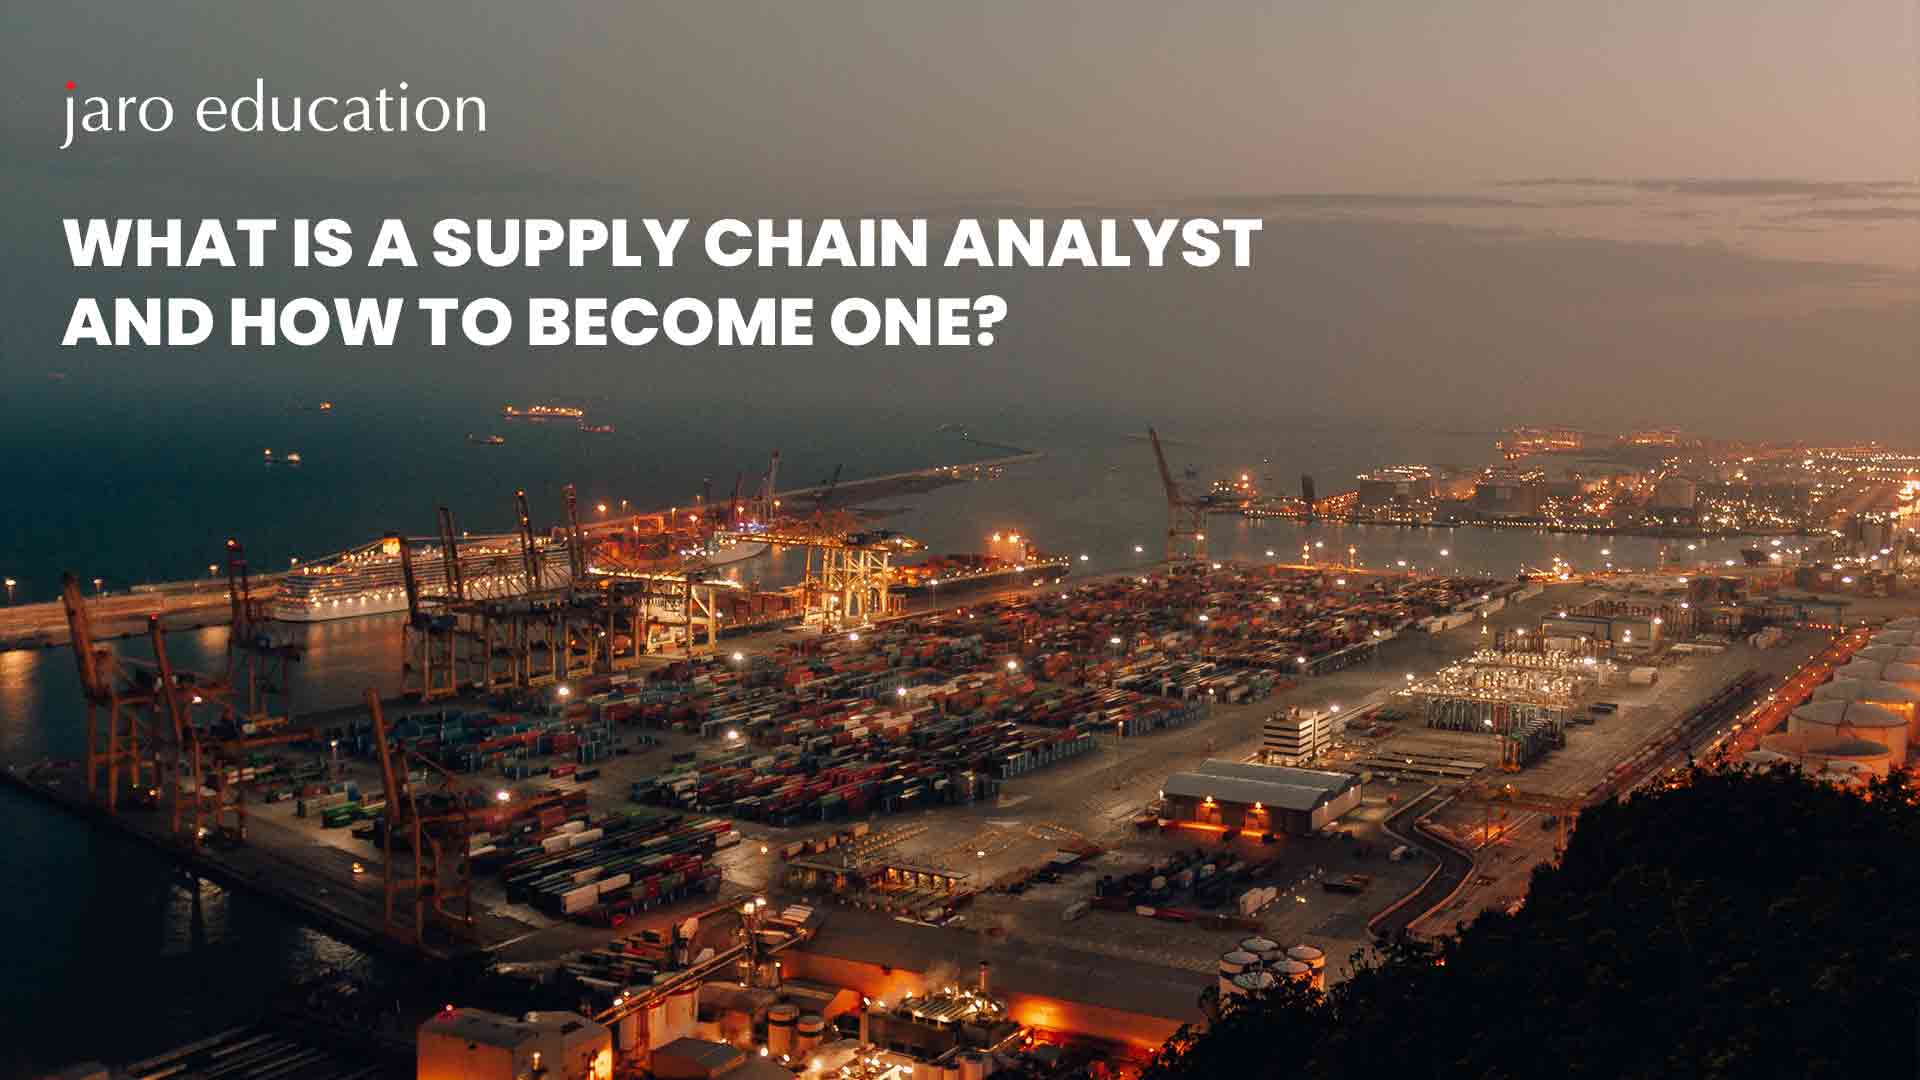 What Is a Supply Chain Analyst and How to Become One